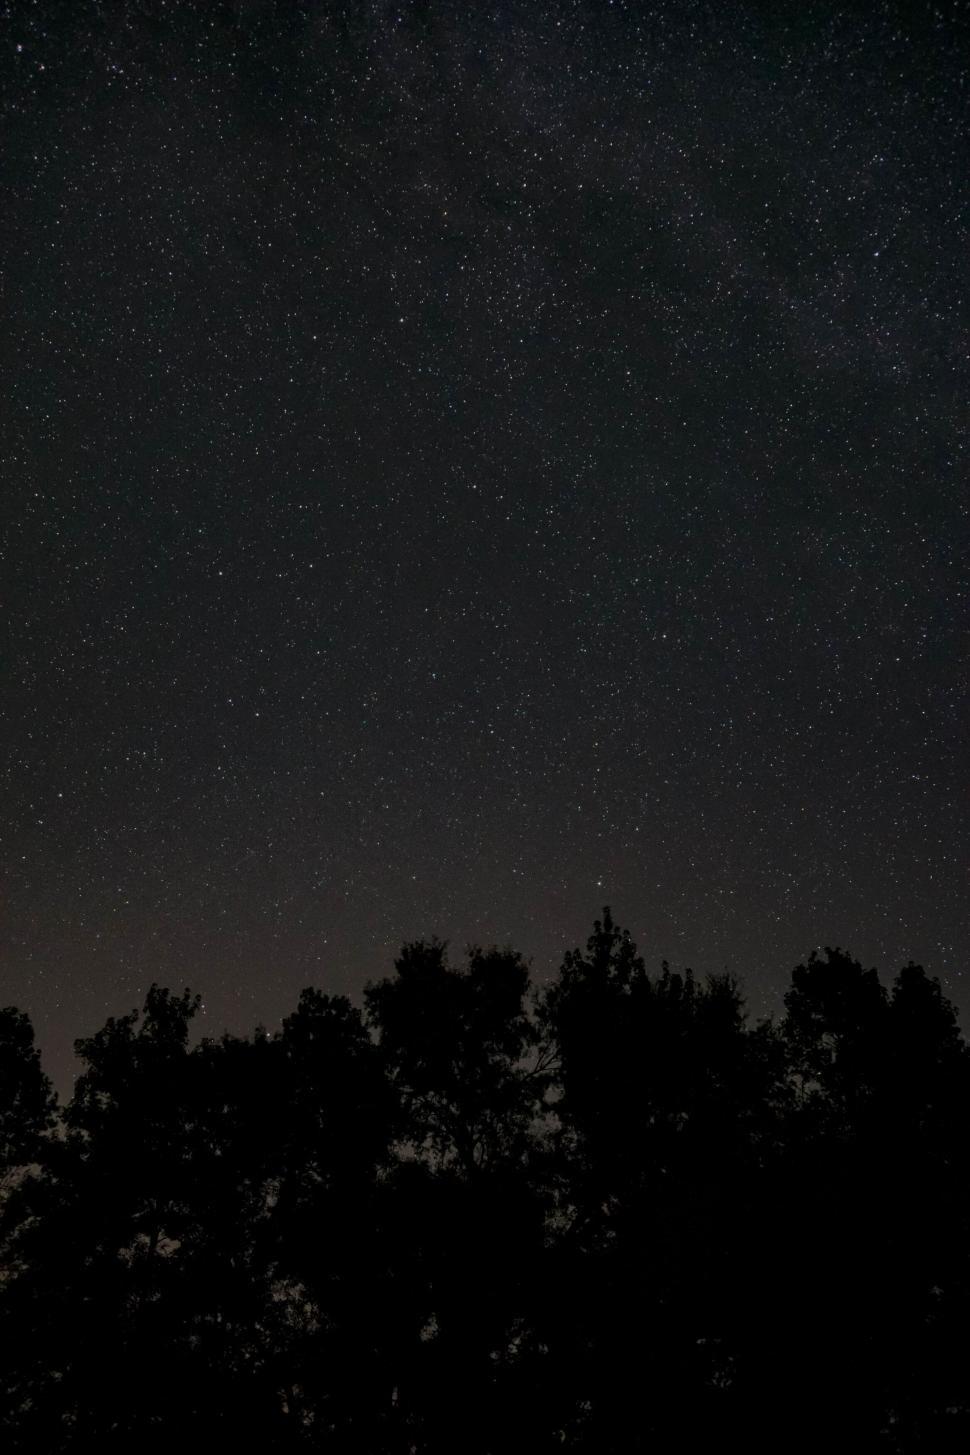 Free Image of Starry night sky over silhouetted trees 